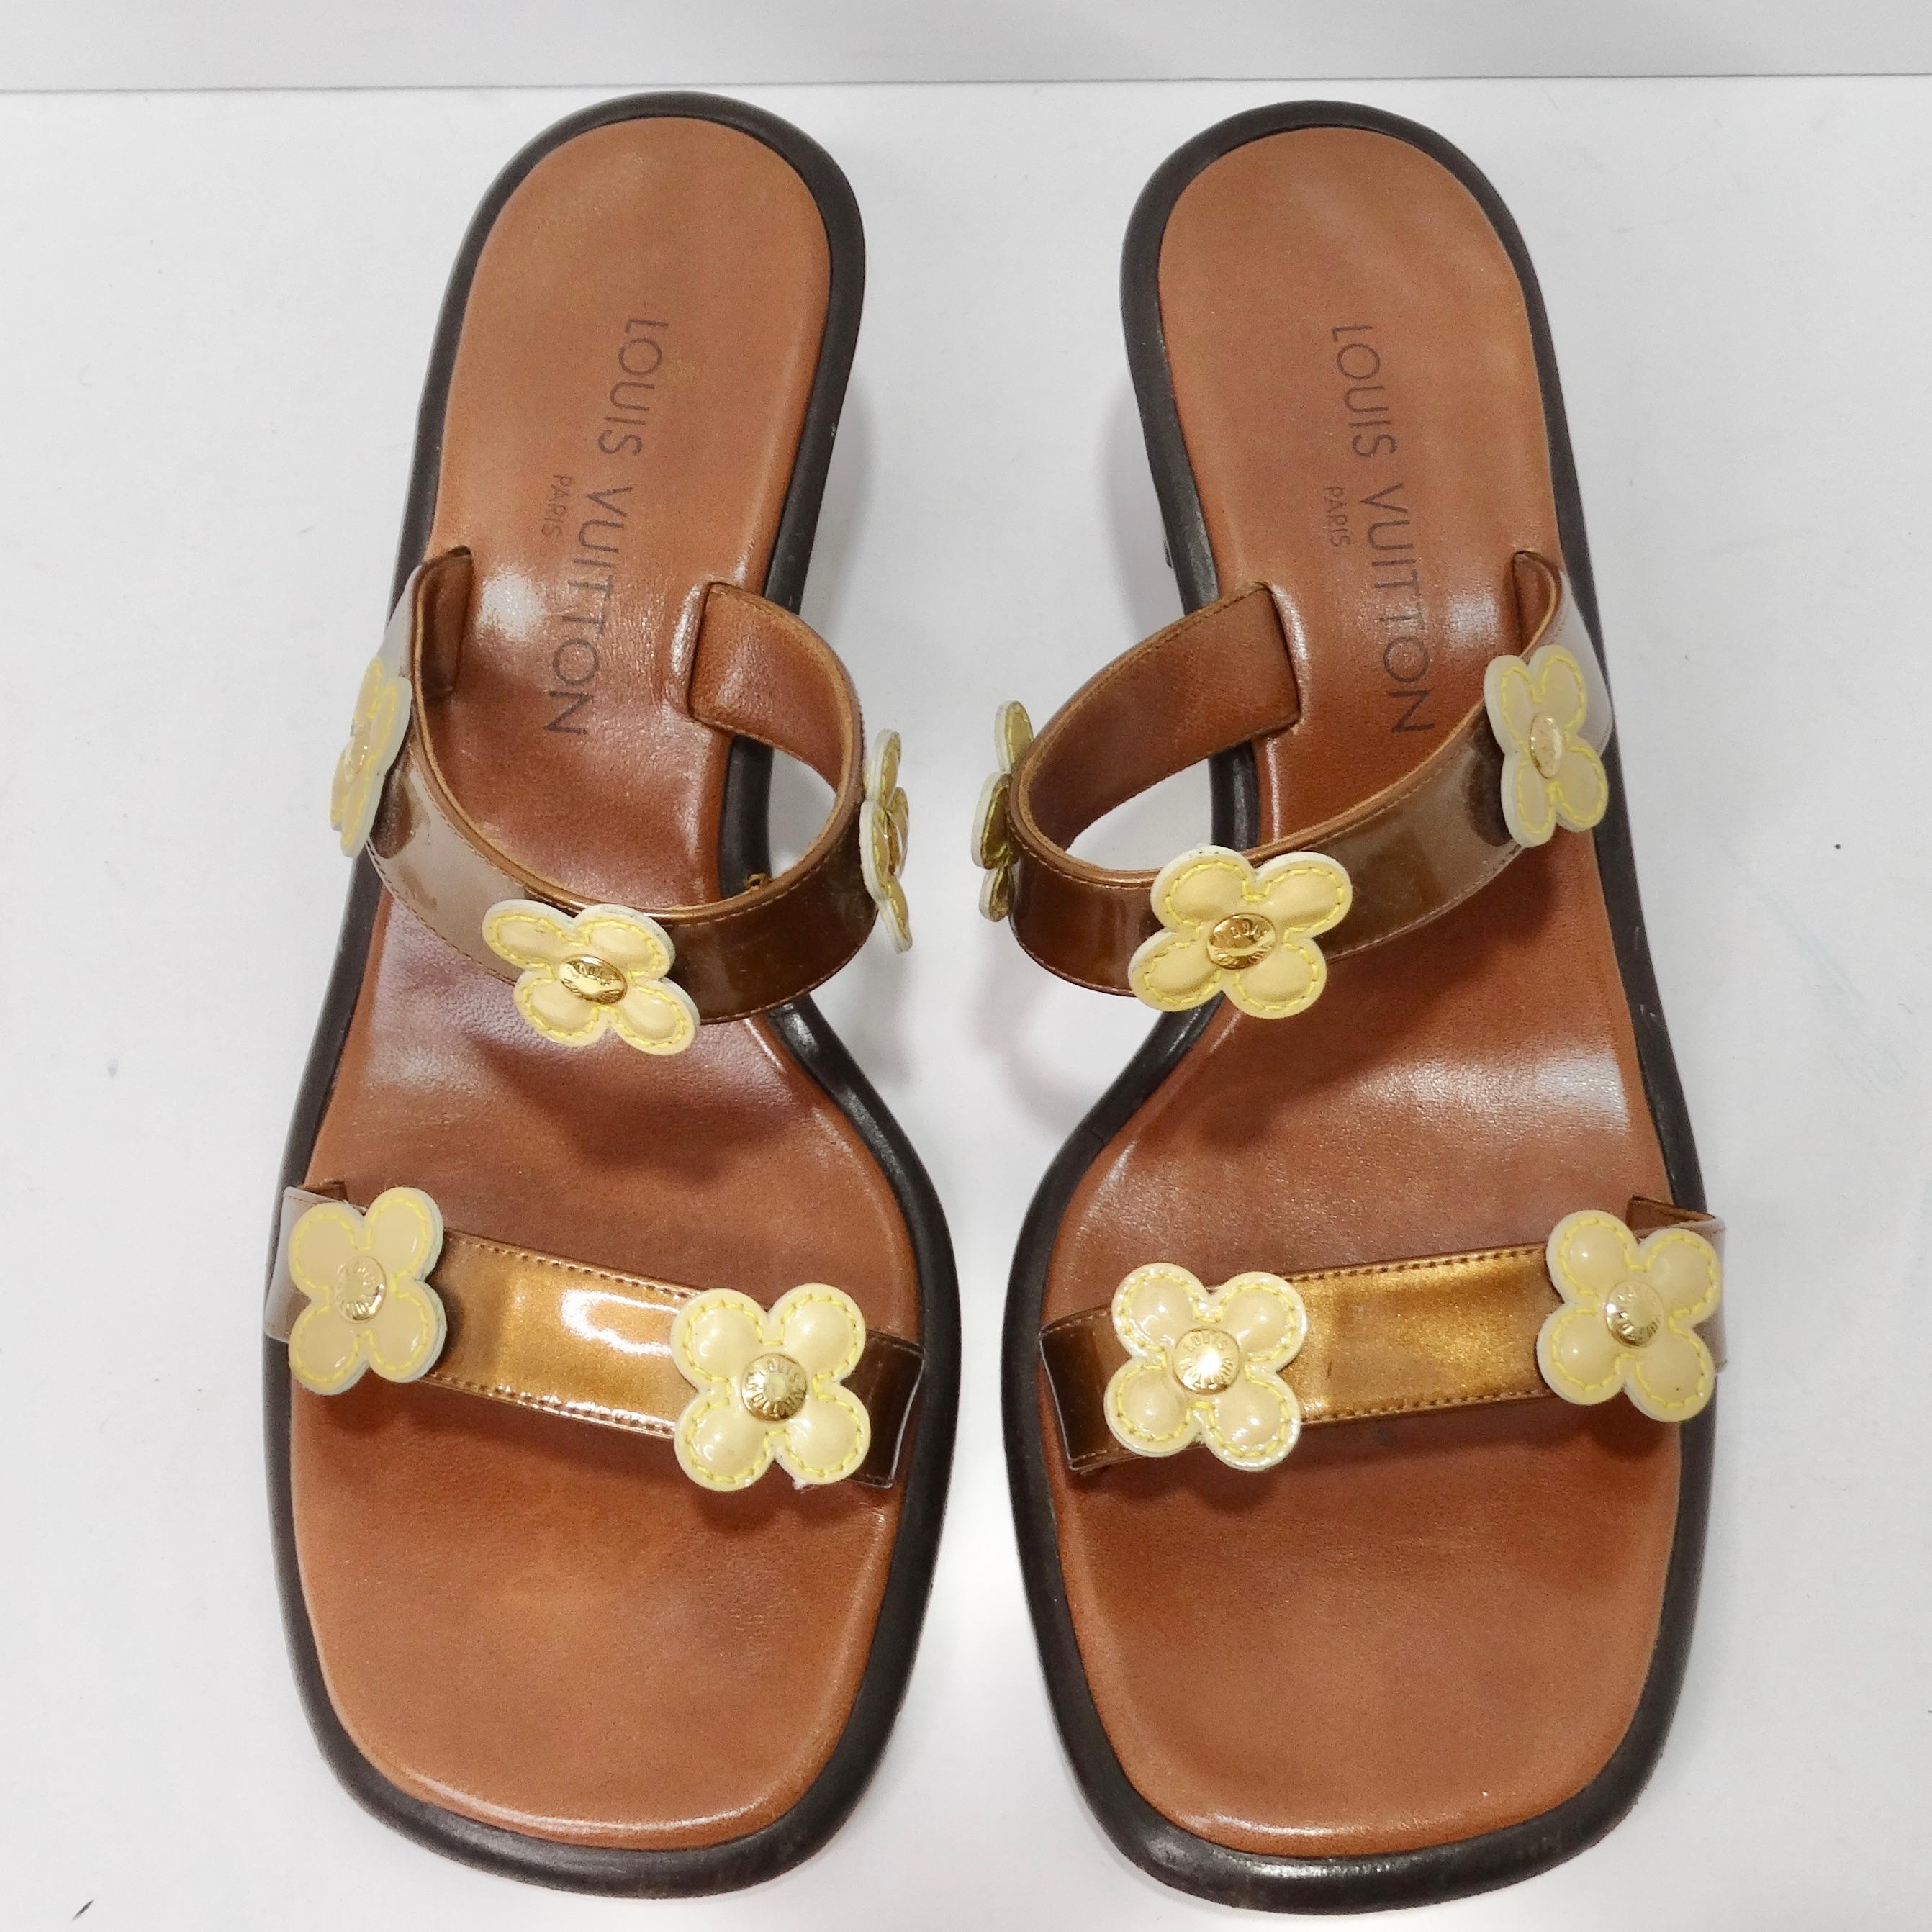 Step into the world of high fashion with these Louis Vuitton Patent Leather Flower Heels. These luxurious brown slip-on sandals redefine elegance and style, combining exceptional craftsmanship with playful design. With two brown patent leather